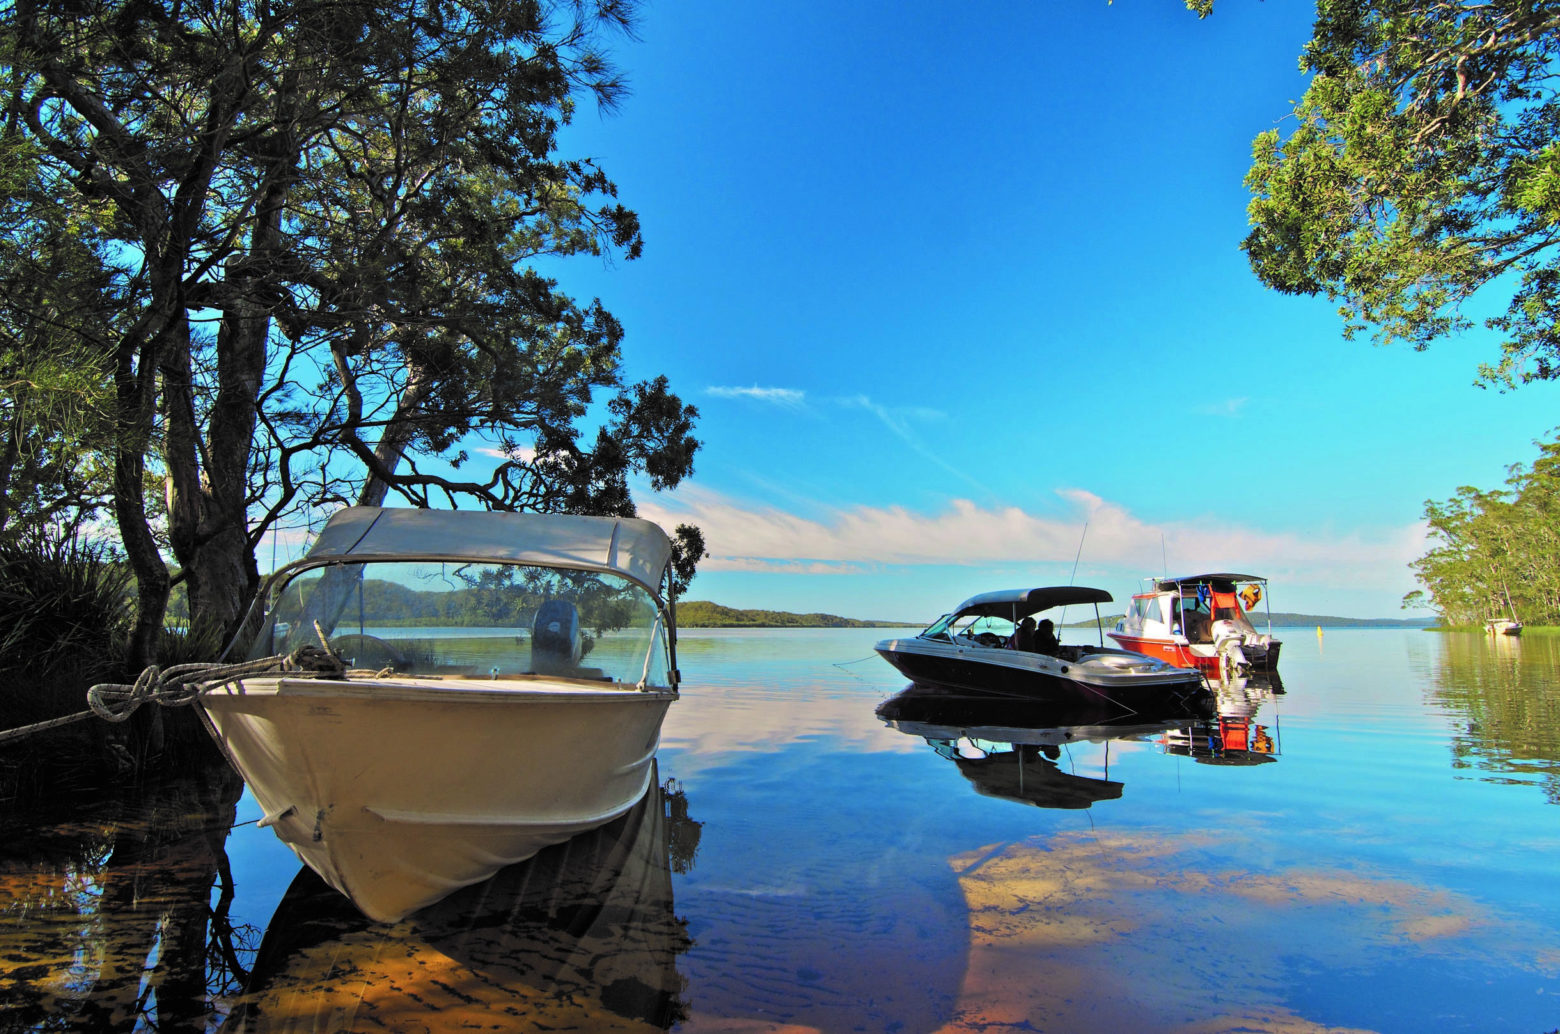 Neranie in Myall Lakes National Park (photo: unknown)